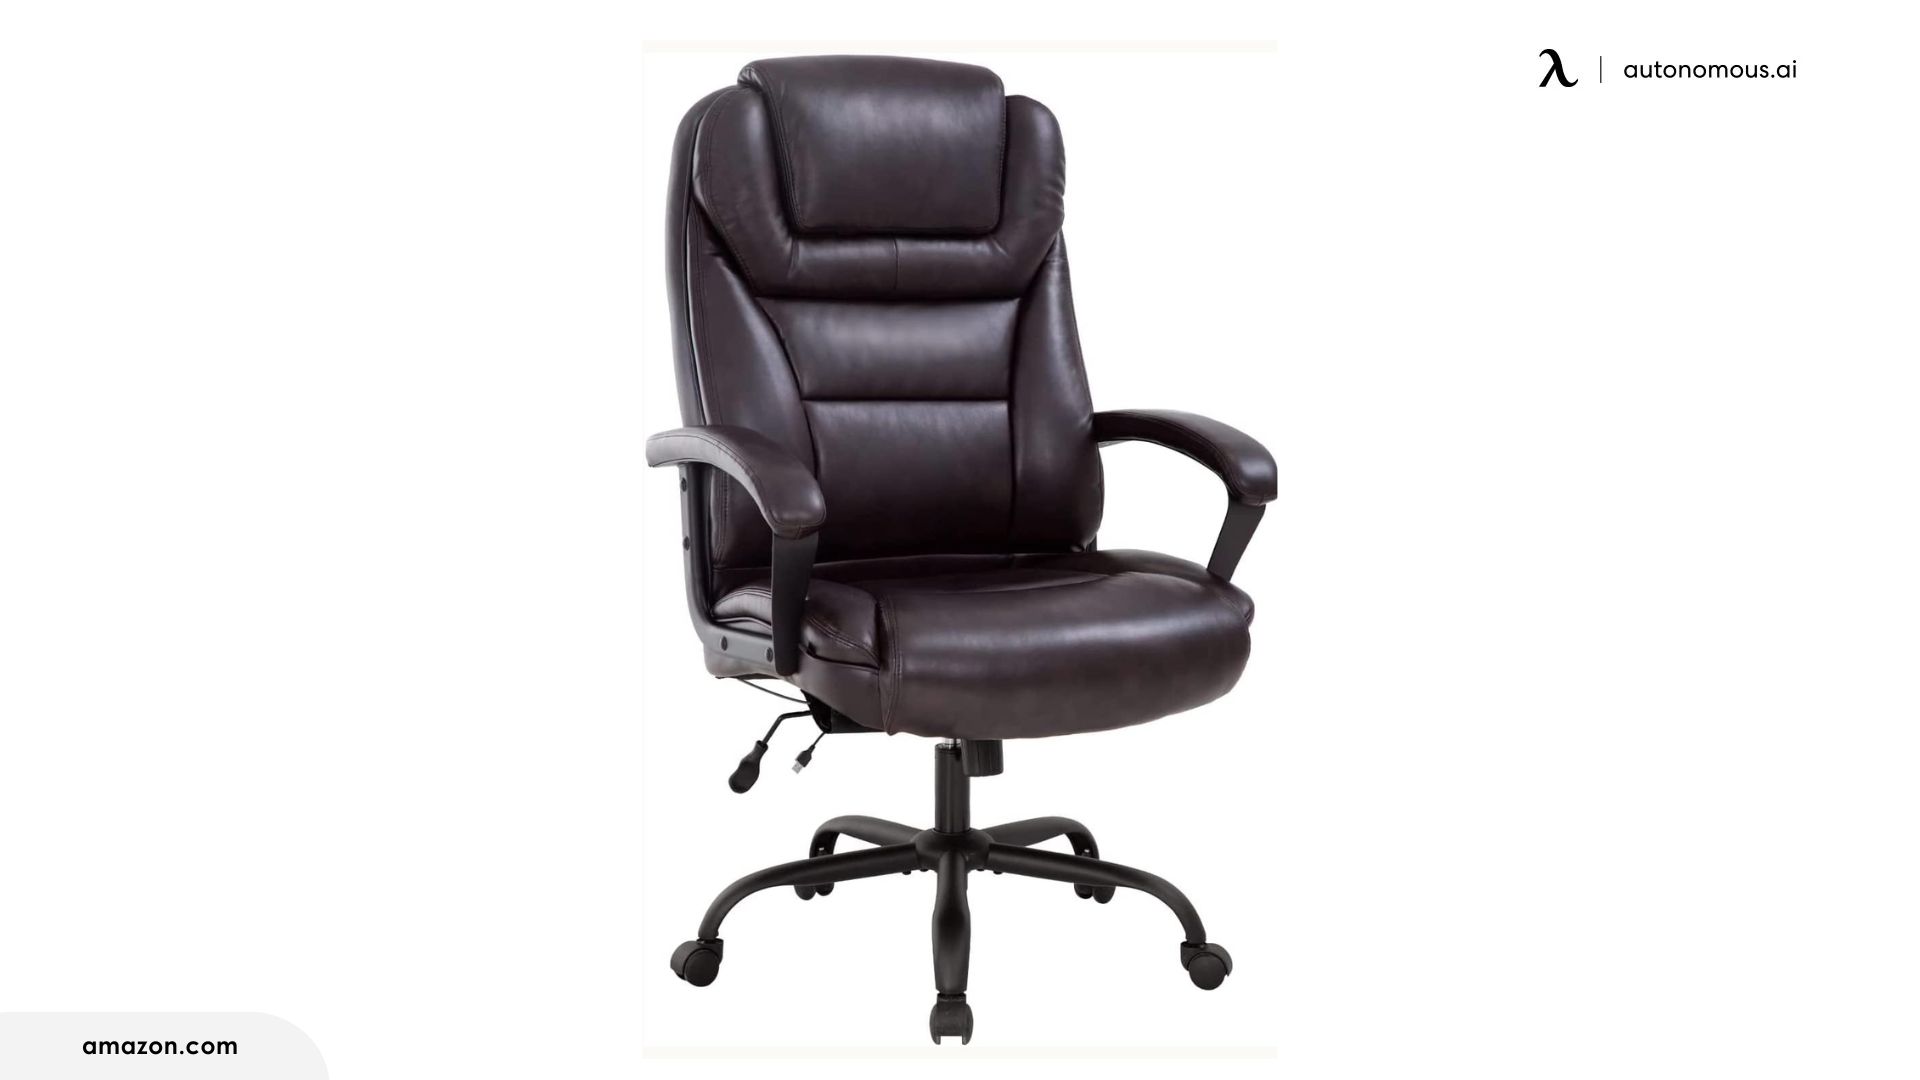 LCH Big & Tall Office Chair